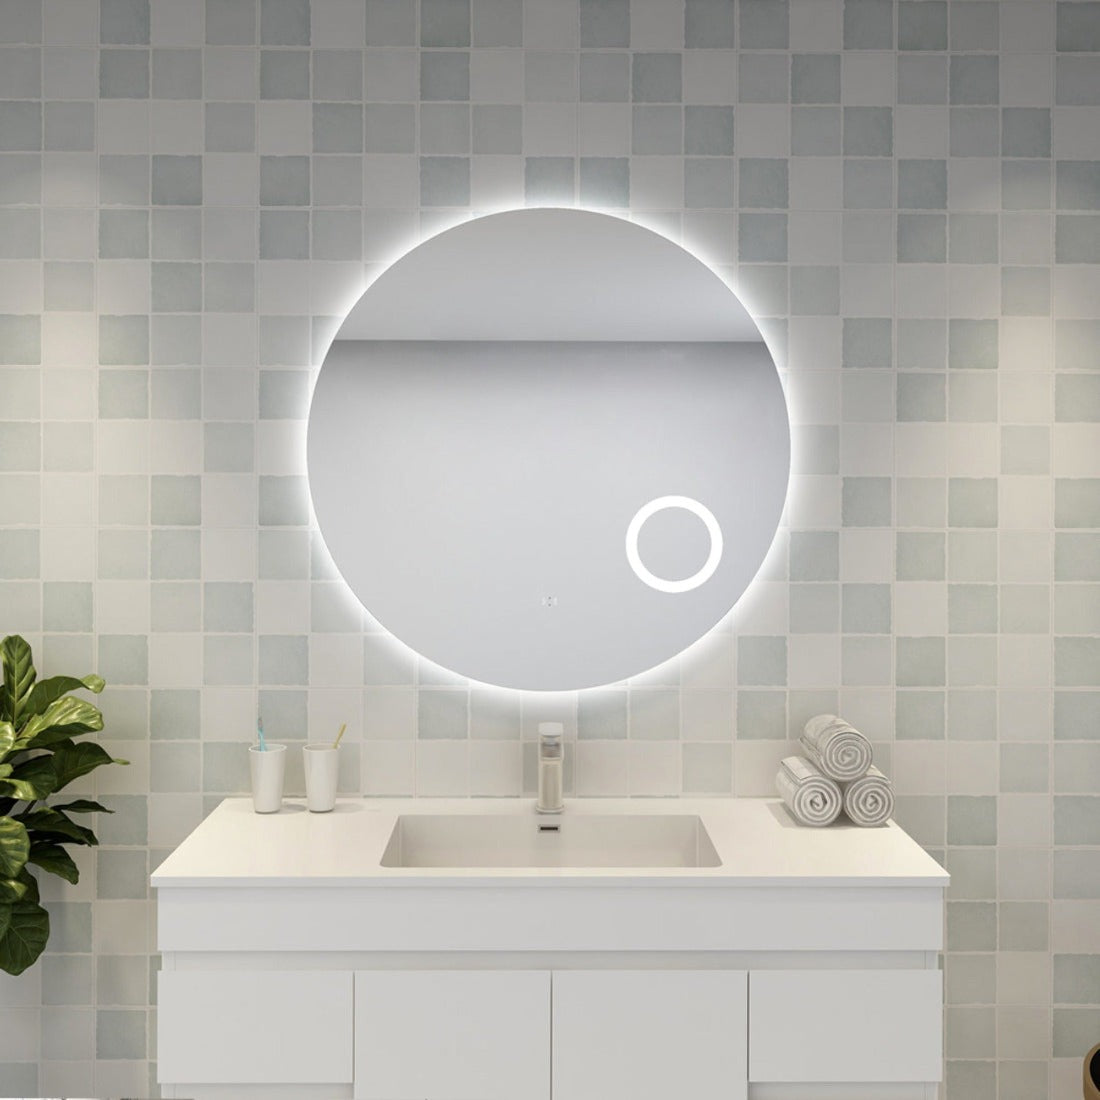 POSEIDON ROUND BACKLIT LED MIRROR WITH MAGNIFIER 3 COLOUR LIGHTS 900MM